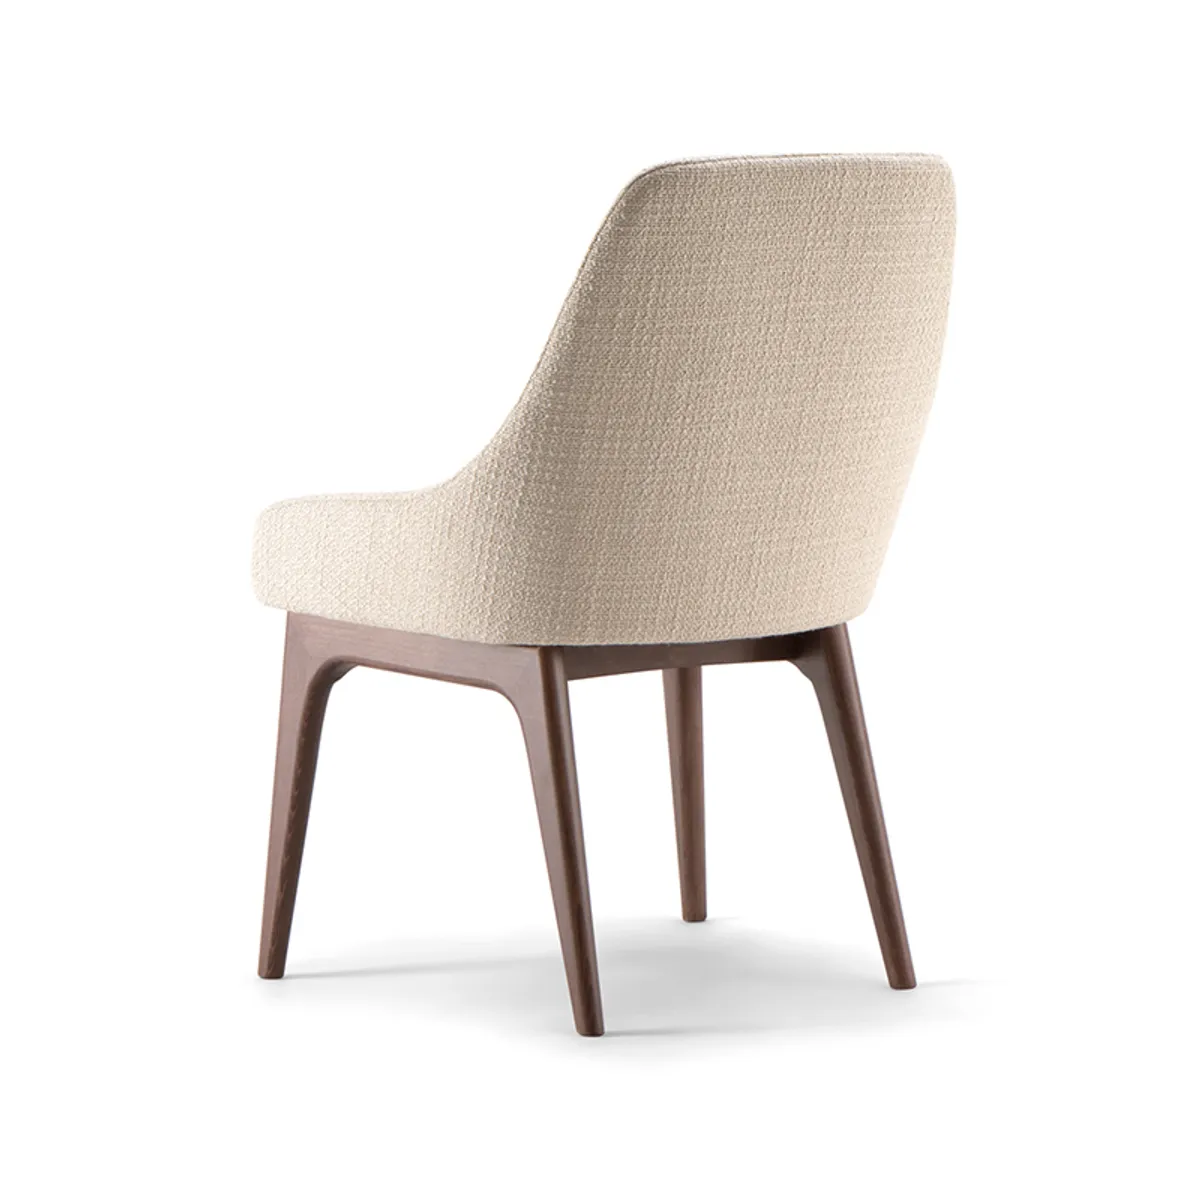 Josie Chair Upholstered Furniture With Wooden Legs